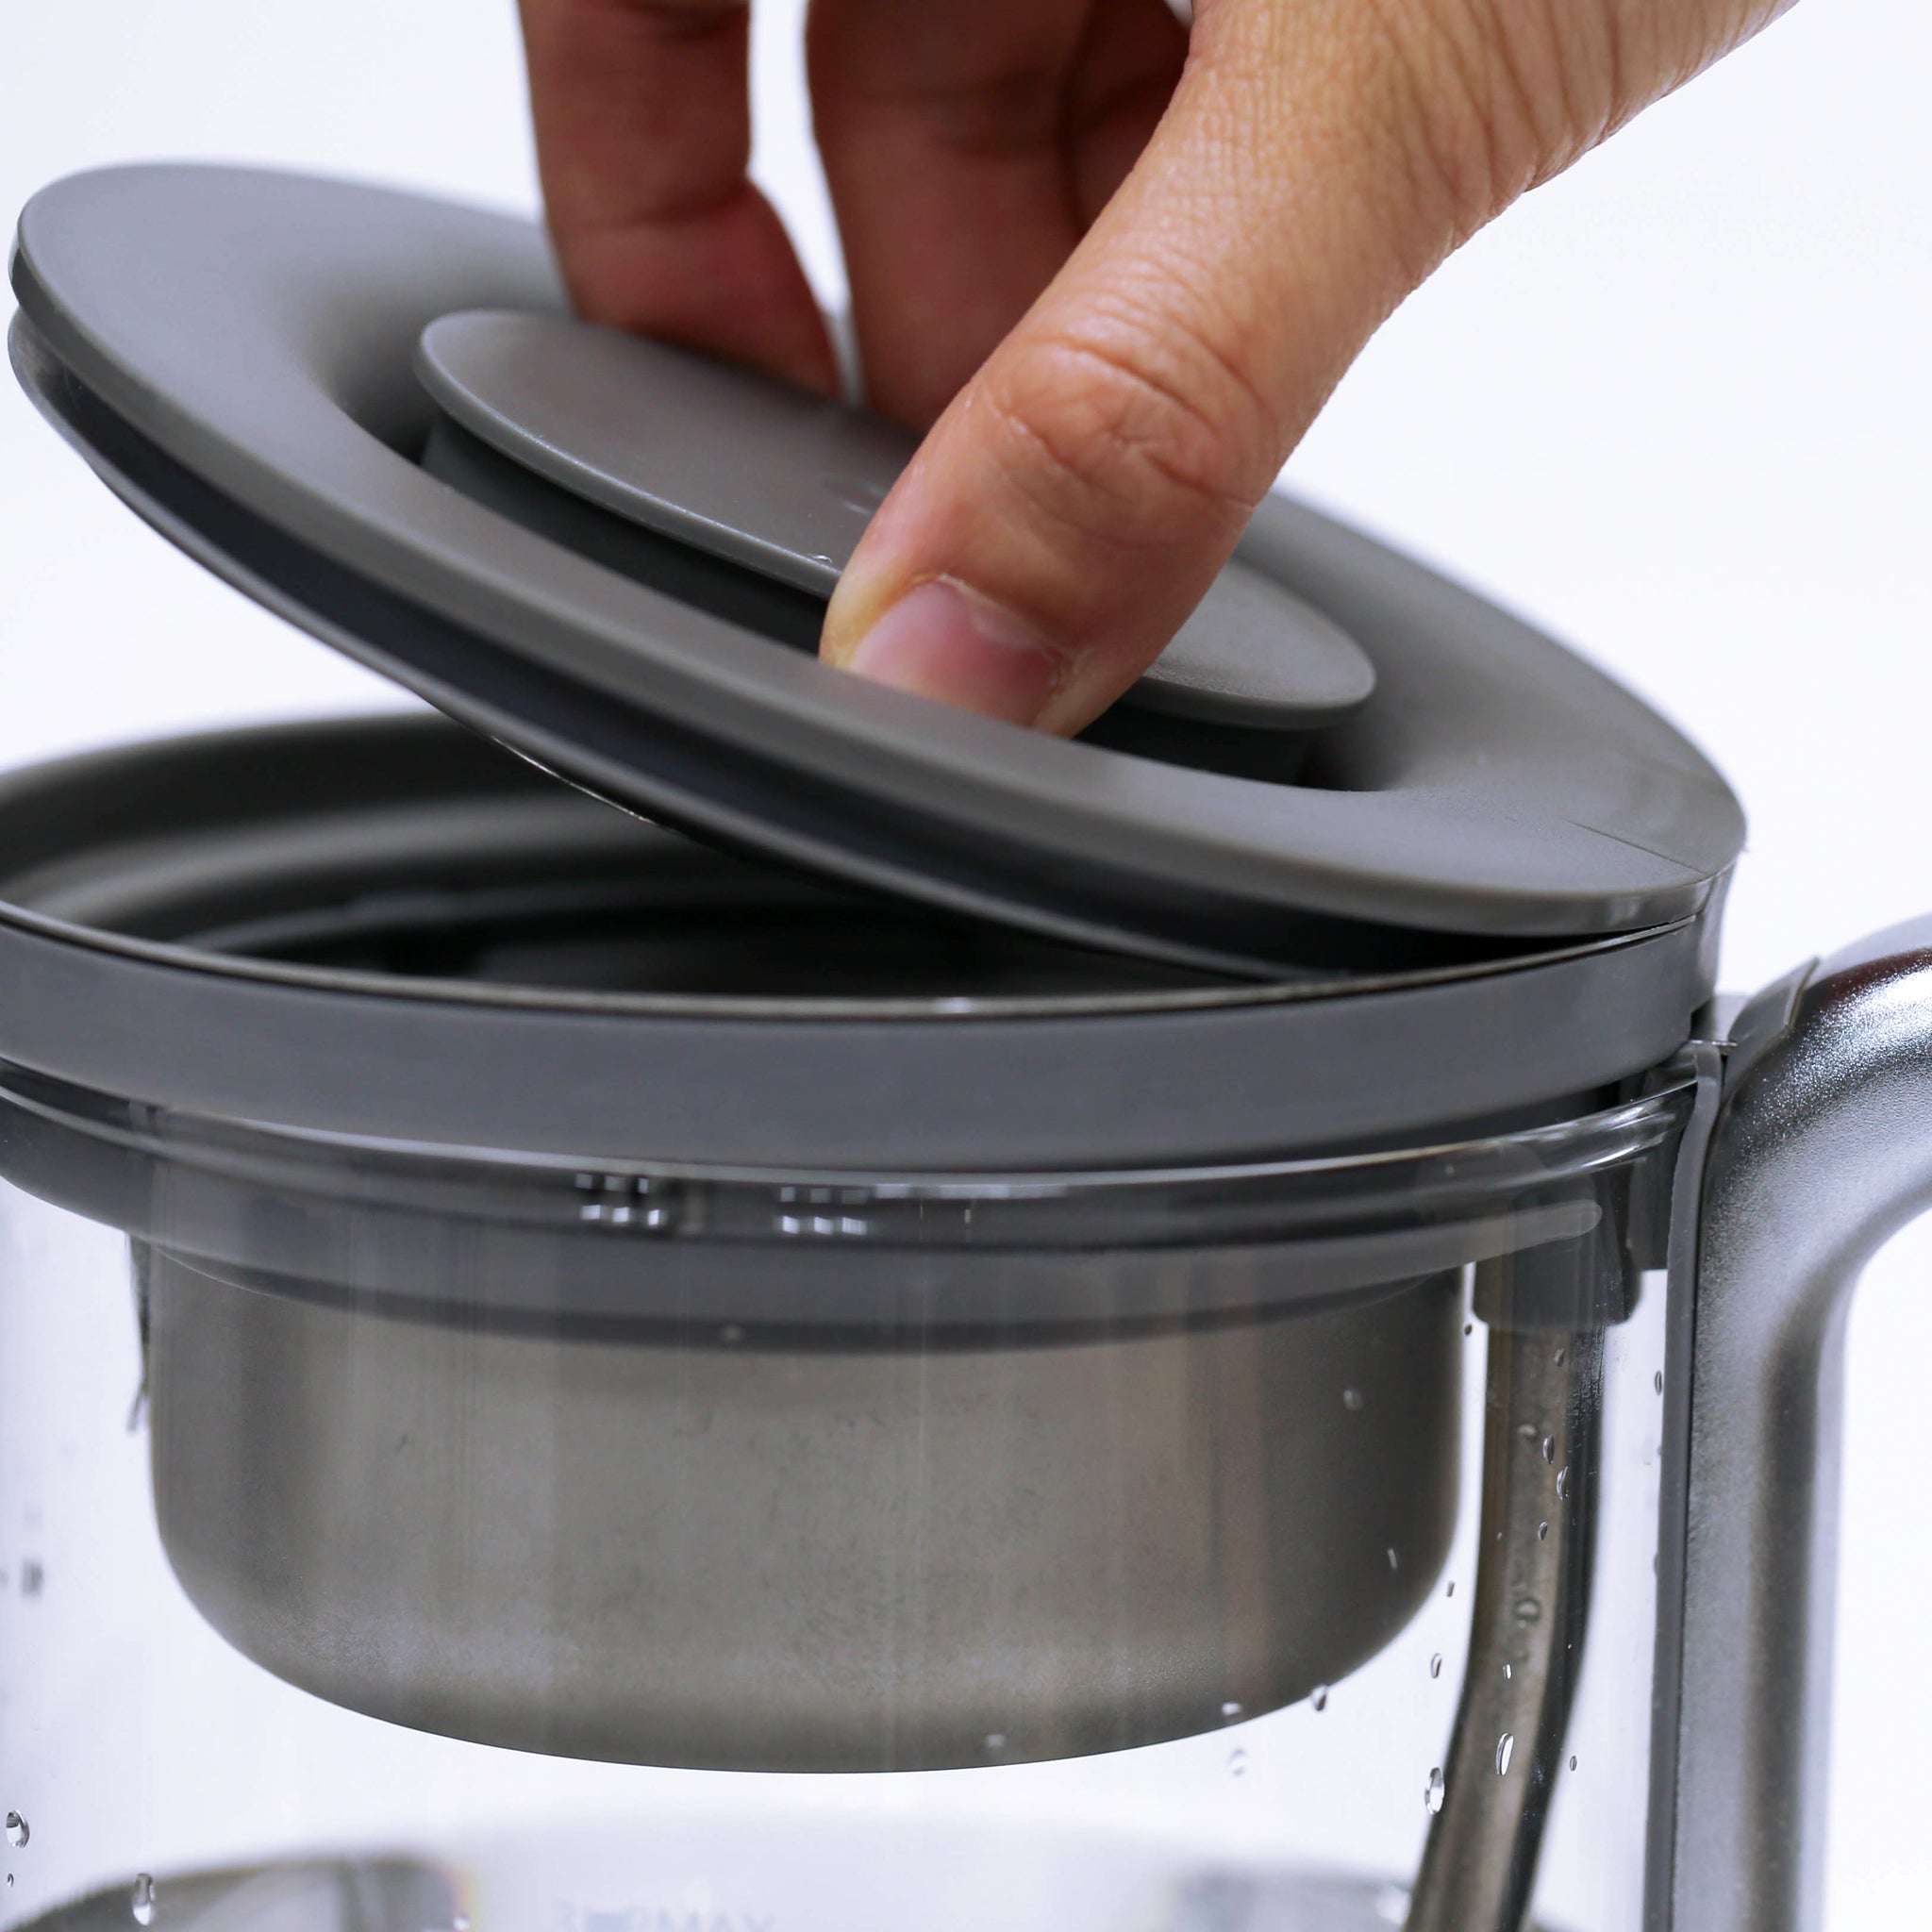 Tips on Properly Closing the Lid